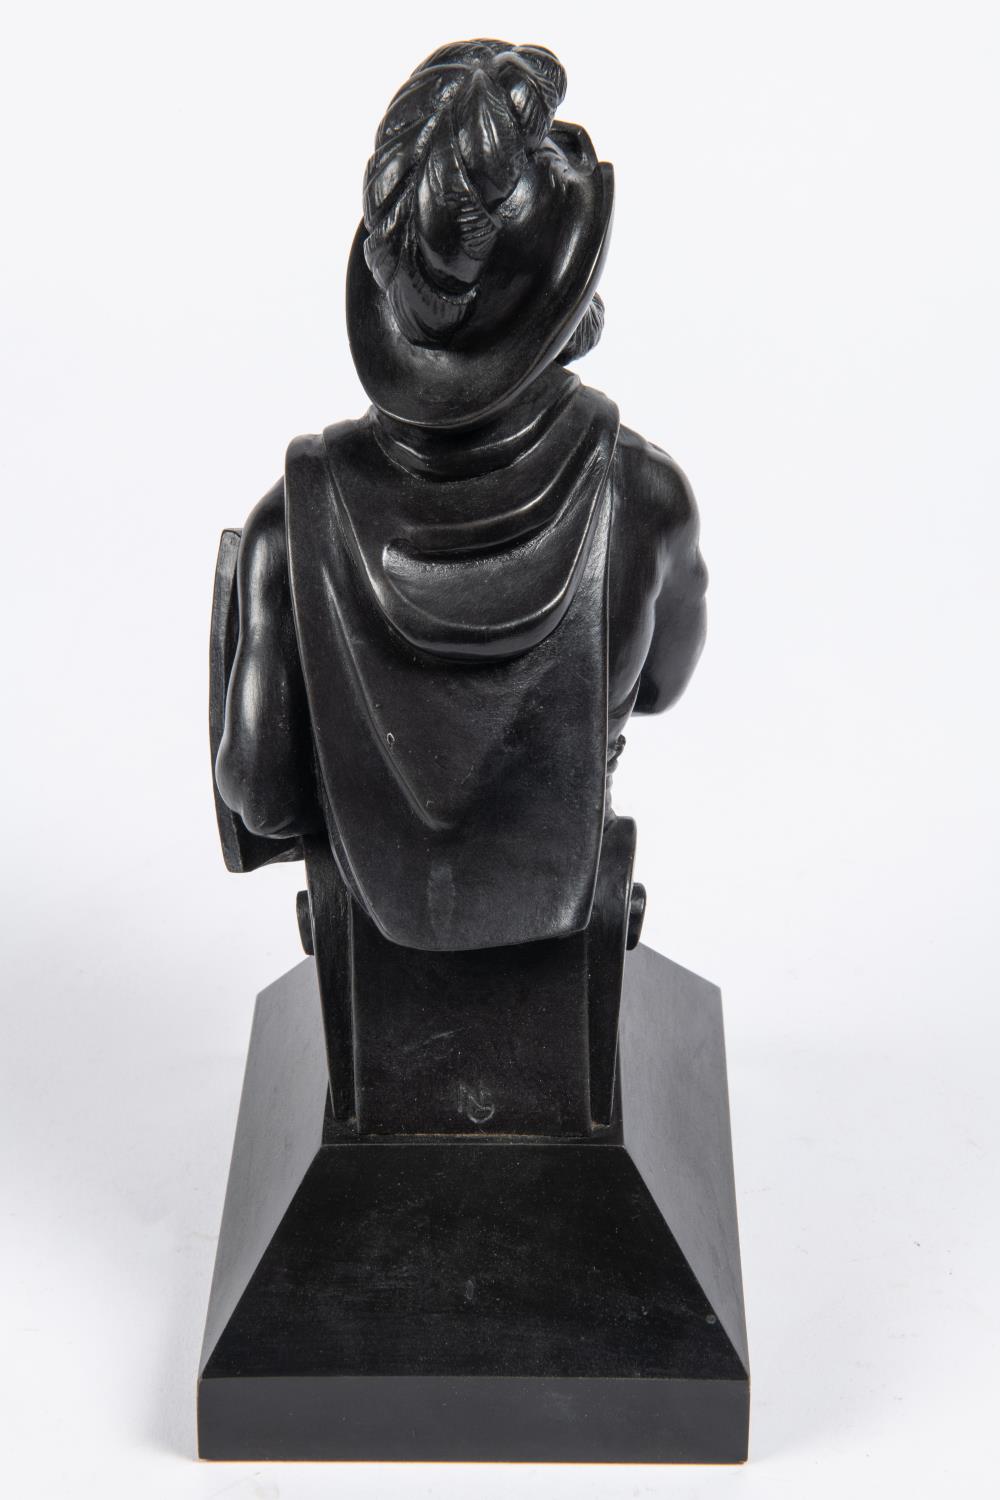 A model of the figurehead of HMS Gladiator (44 gun man of war launched in 1782), 9½", black finish - Image 4 of 4